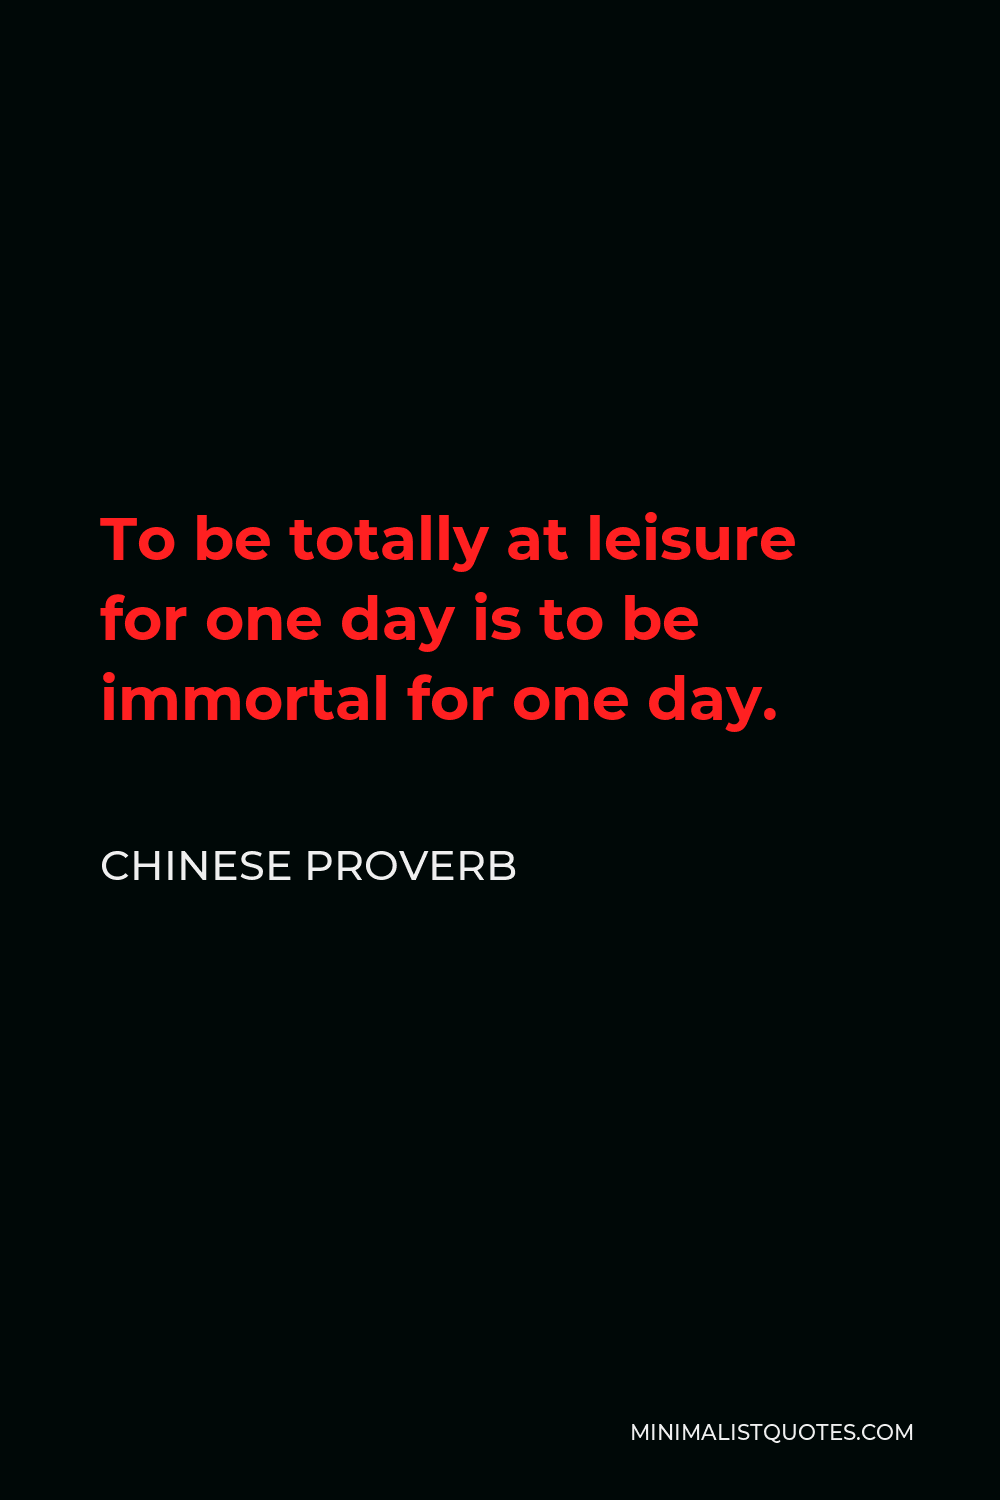 Chinese Proverb Quote - To be totally at leisure for one day is to be immortal for one day.